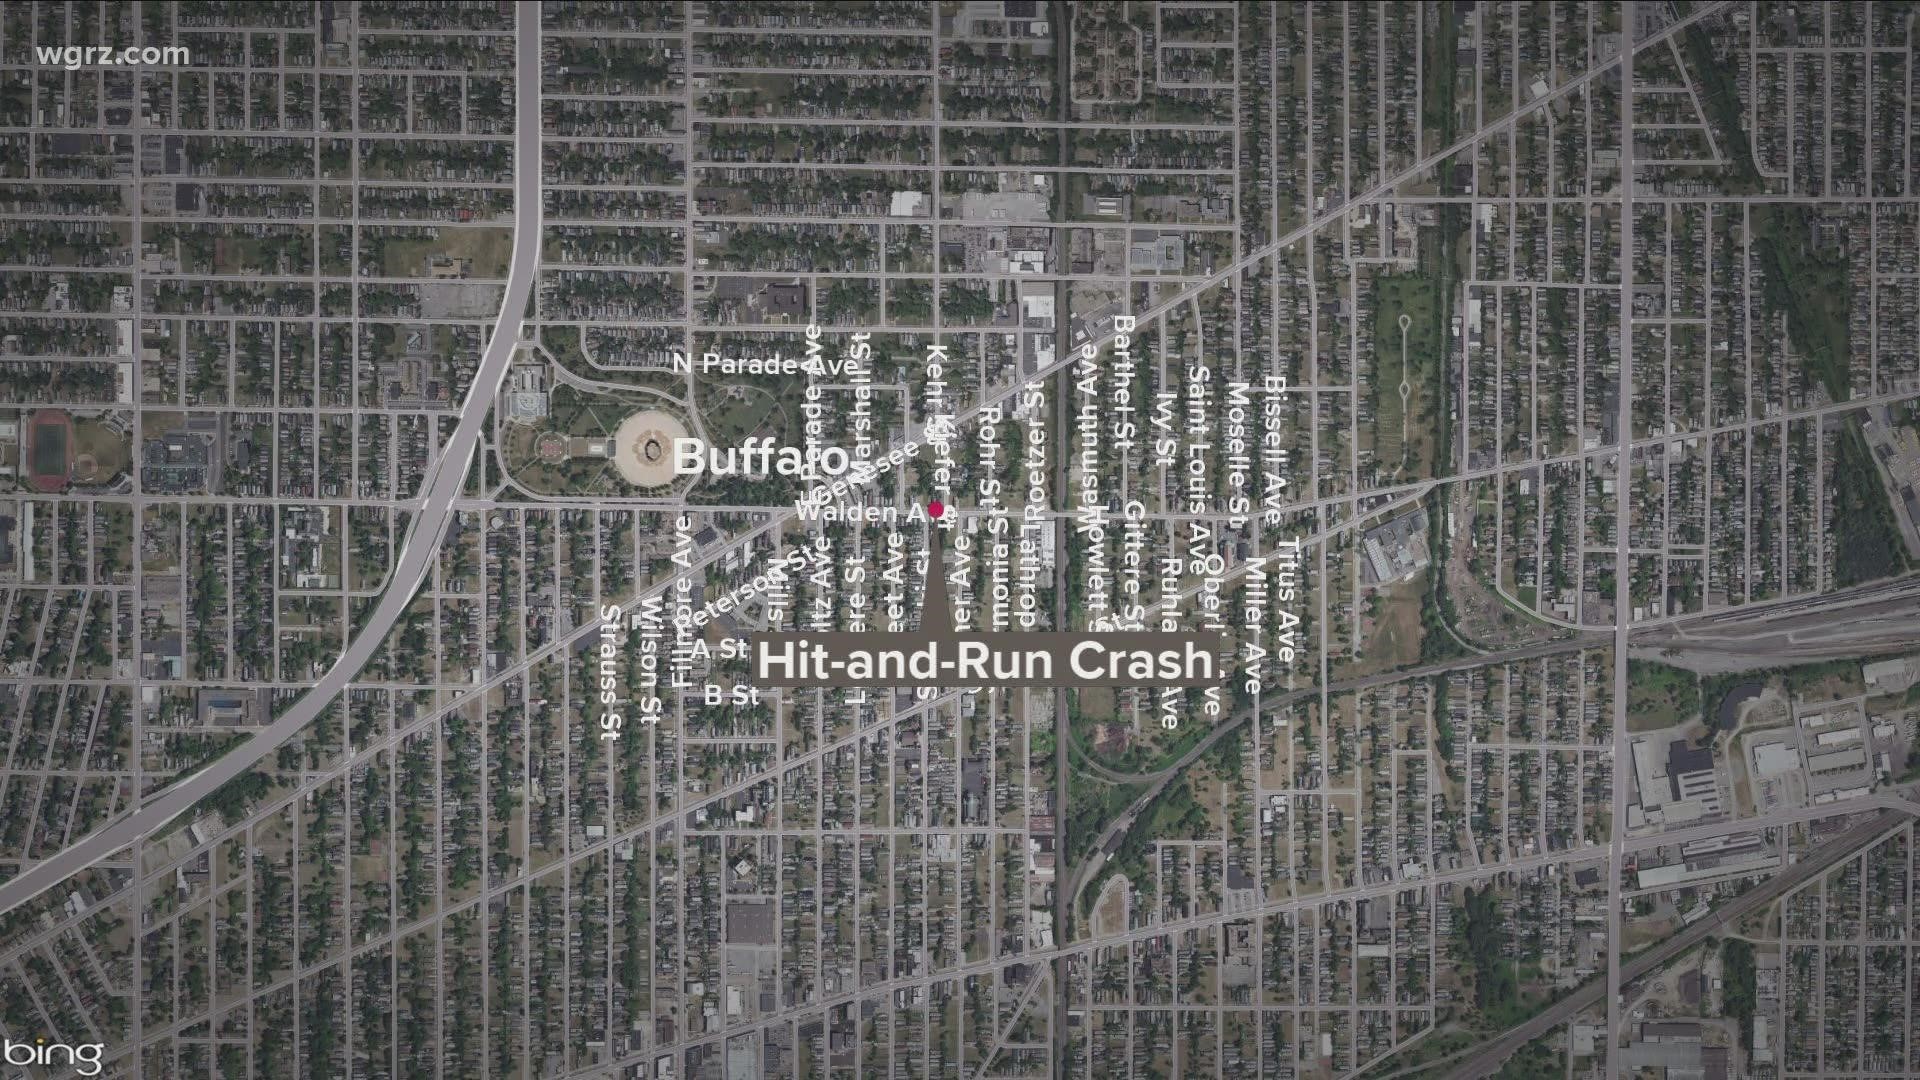 49-year-old woman has died after a hit and run crash on Walden Avenue just east of Genesee Street...